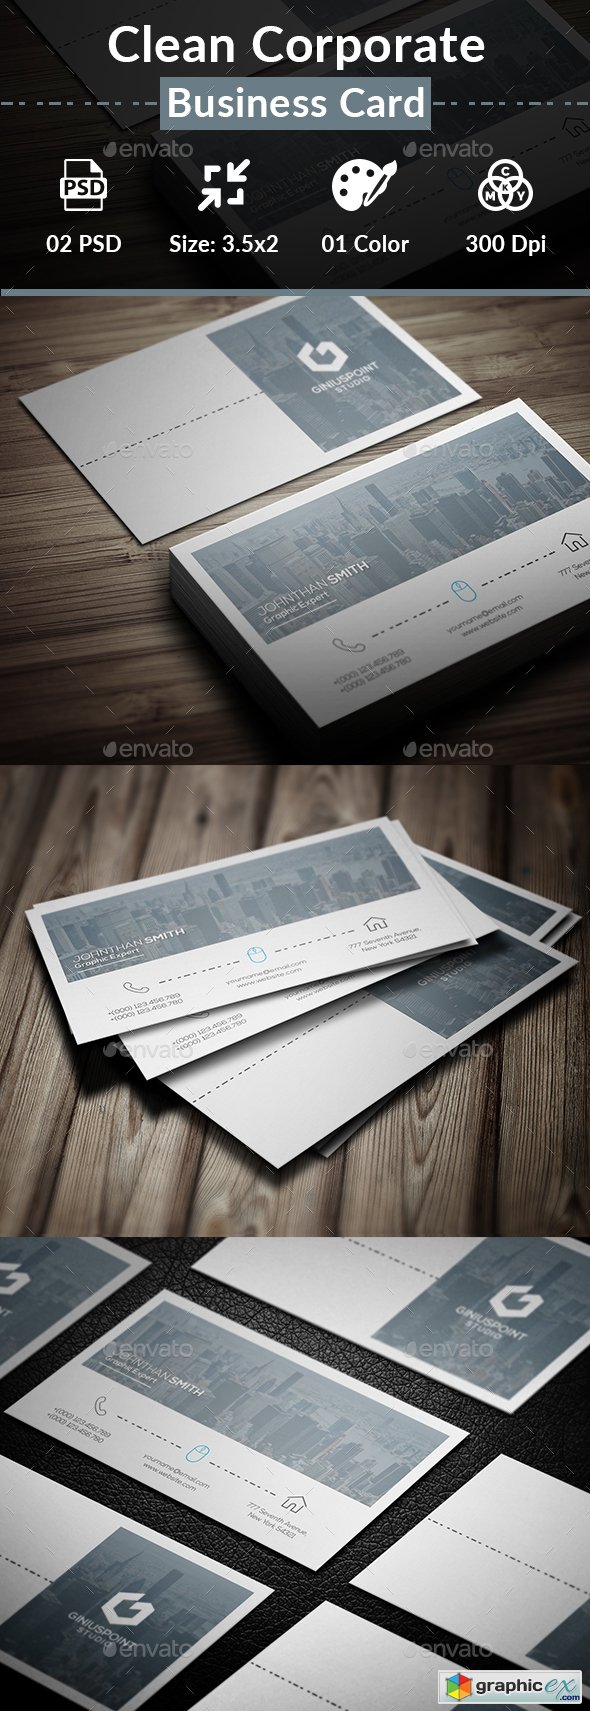 Clean Corporate Business Card 20359277